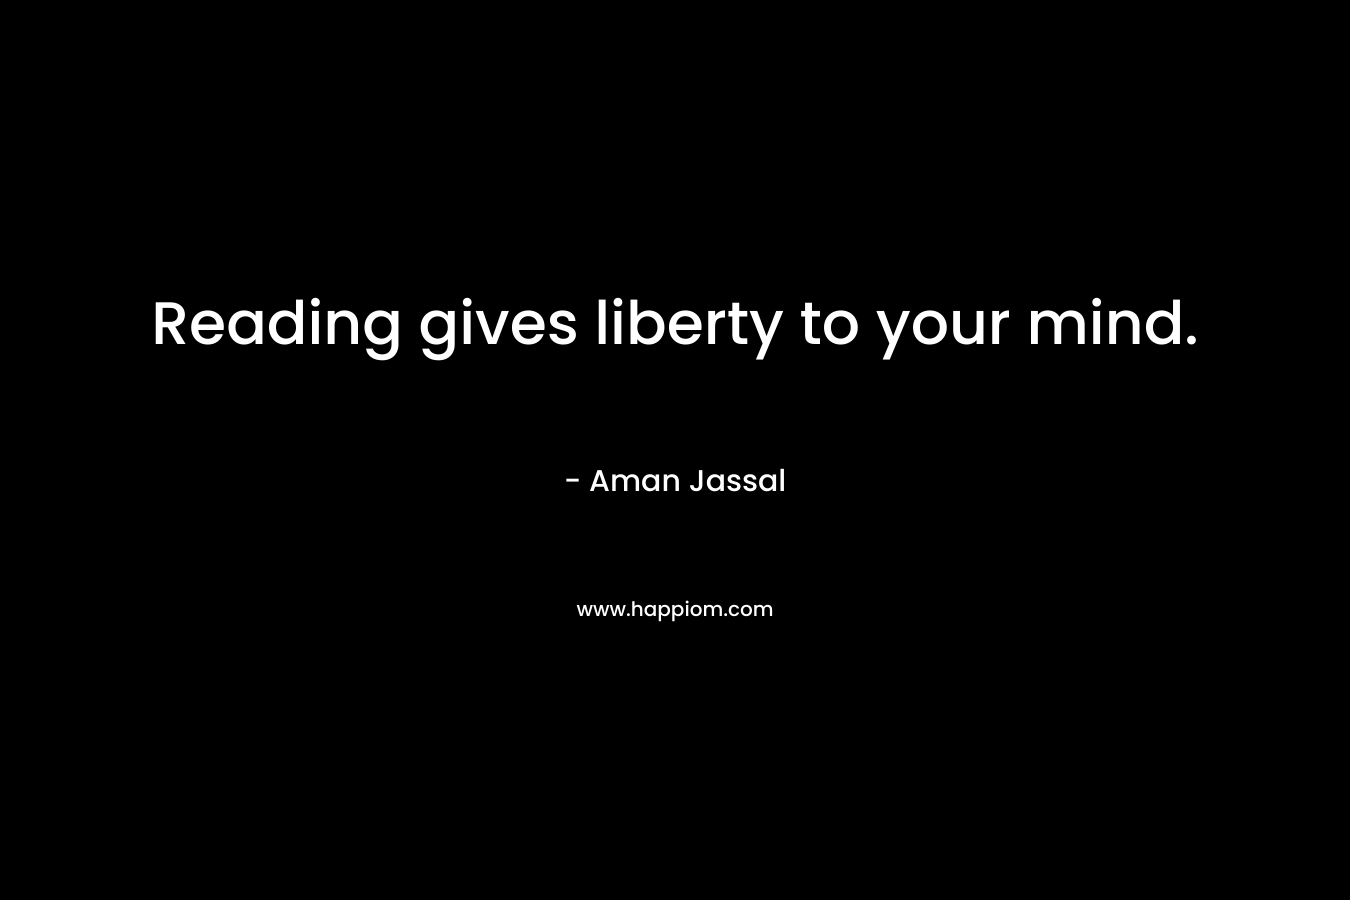 Reading gives liberty to your mind.